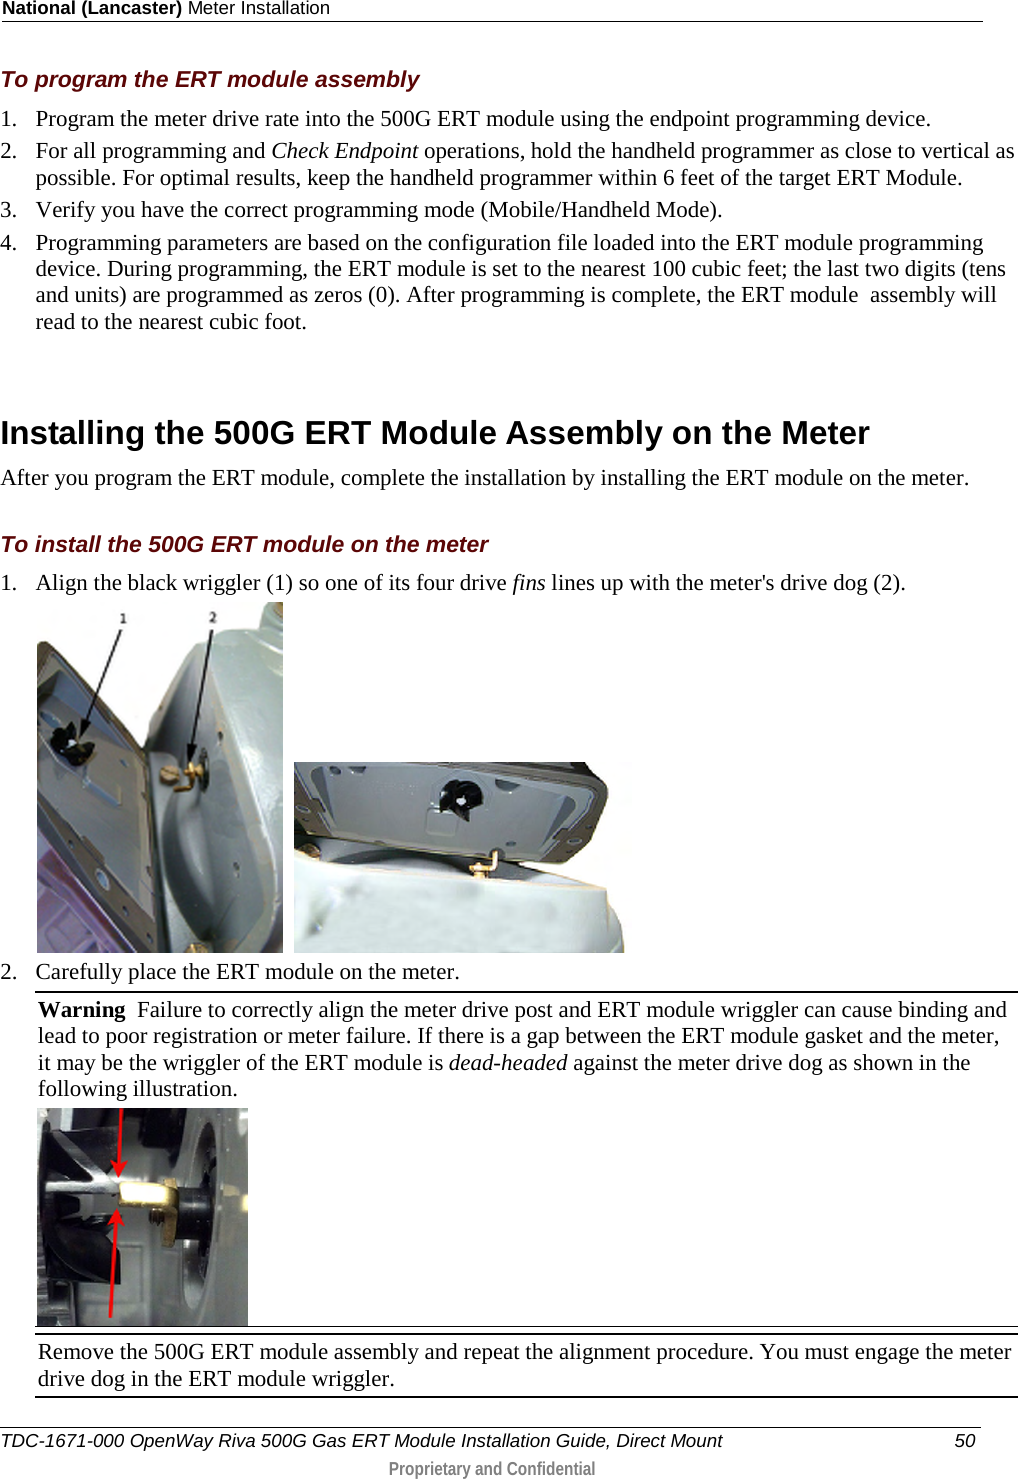 National (Lancaster) Meter Installation  To program the ERT module assembly 1. Program the meter drive rate into the 500G ERT module using the endpoint programming device.  2. For all programming and Check Endpoint operations, hold the handheld programmer as close to vertical as possible. For optimal results, keep the handheld programmer within 6 feet of the target ERT Module.  3. Verify you have the correct programming mode (Mobile/Handheld Mode).  4. Programming parameters are based on the configuration file loaded into the ERT module programming device. During programming, the ERT module is set to the nearest 100 cubic feet; the last two digits (tens and units) are programmed as zeros (0). After programming is complete, the ERT module  assembly will read to the nearest cubic foot.    Installing the 500G ERT Module Assembly on the Meter After you program the ERT module, complete the installation by installing the ERT module on the meter.   To install the 500G ERT module on the meter 1. Align the black wriggler (1) so one of its four drive fins lines up with the meter&apos;s drive dog (2).      2. Carefully place the ERT module on the meter.  Warning  Failure to correctly align the meter drive post and ERT module wriggler can cause binding and lead to poor registration or meter failure. If there is a gap between the ERT module gasket and the meter, it may be the wriggler of the ERT module is dead-headed against the meter drive dog as shown in the following illustration.   Remove the 500G ERT module assembly and repeat the alignment procedure. You must engage the meter drive dog in the ERT module wriggler.  TDC-1671-000 OpenWay Riva 500G Gas ERT Module Installation Guide, Direct Mount 50  Proprietary and Confidential    